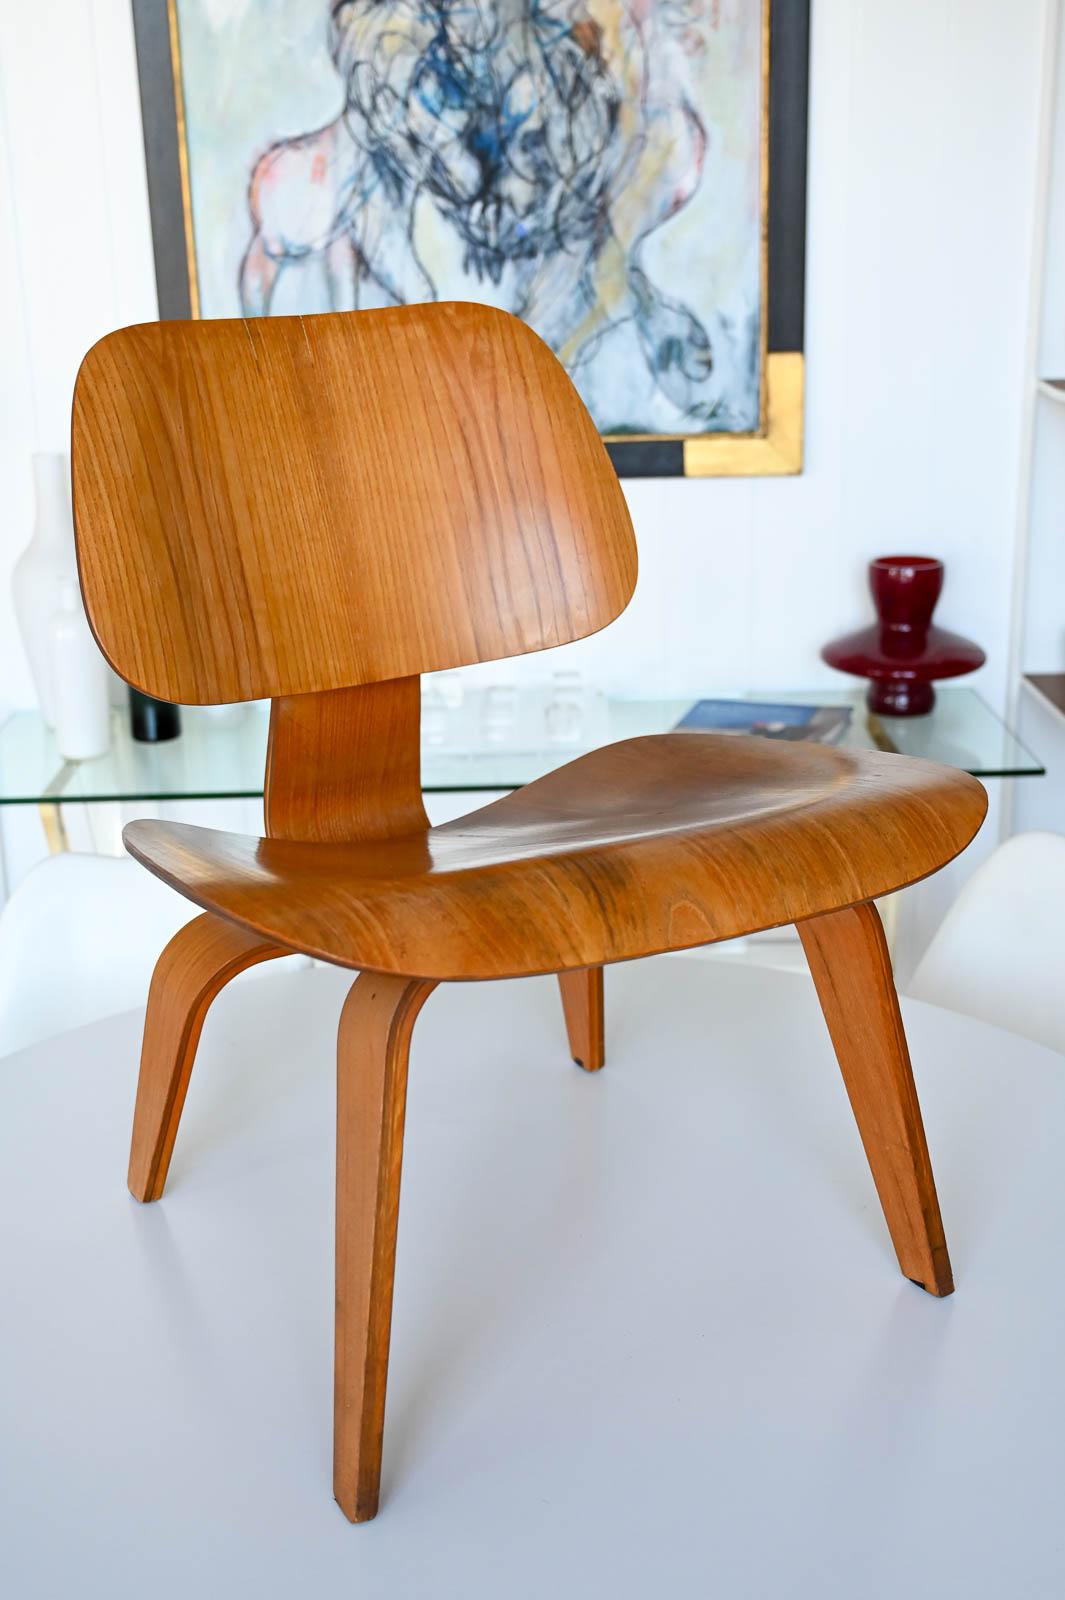 Charles Eames for Herman Miller LCW in Ash, ca. 1952.  Early original with Herman Miller foil label.  Chair is in immaculate condition with all original shock mounts.  No chips or warping of bent wood and the chair sits very solid. Very well cared